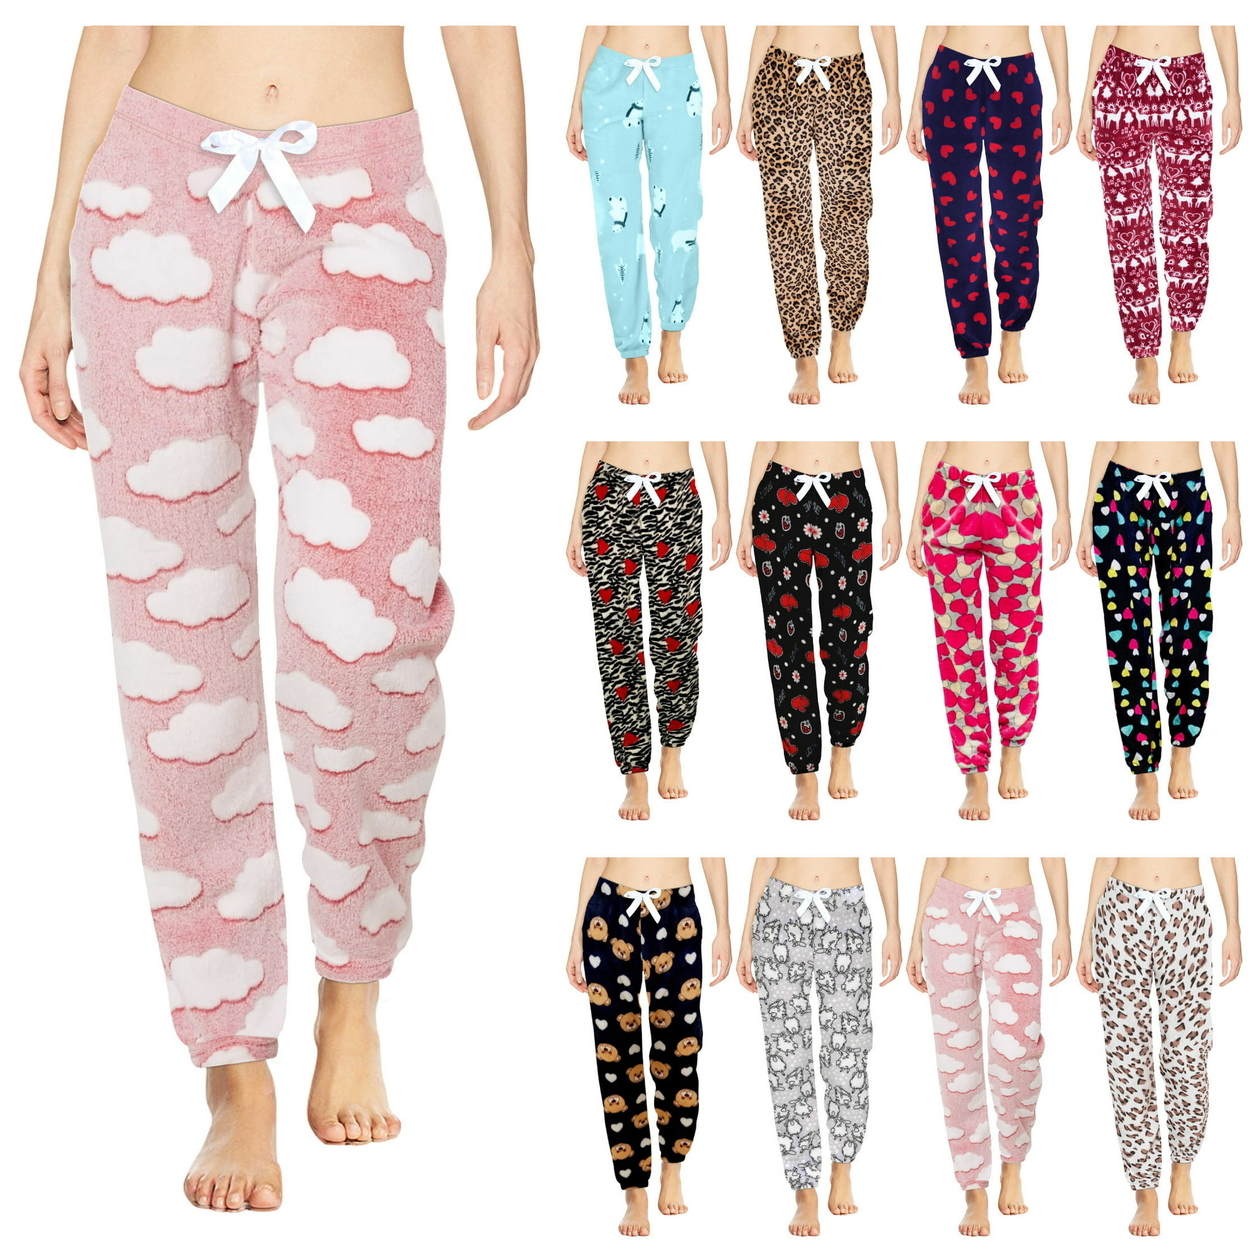 4-Pack: Women's Solid & Printed Ultra-Soft Comfy Stretch Micro-Fleece Pajama Lounge Pants - Small, Solid